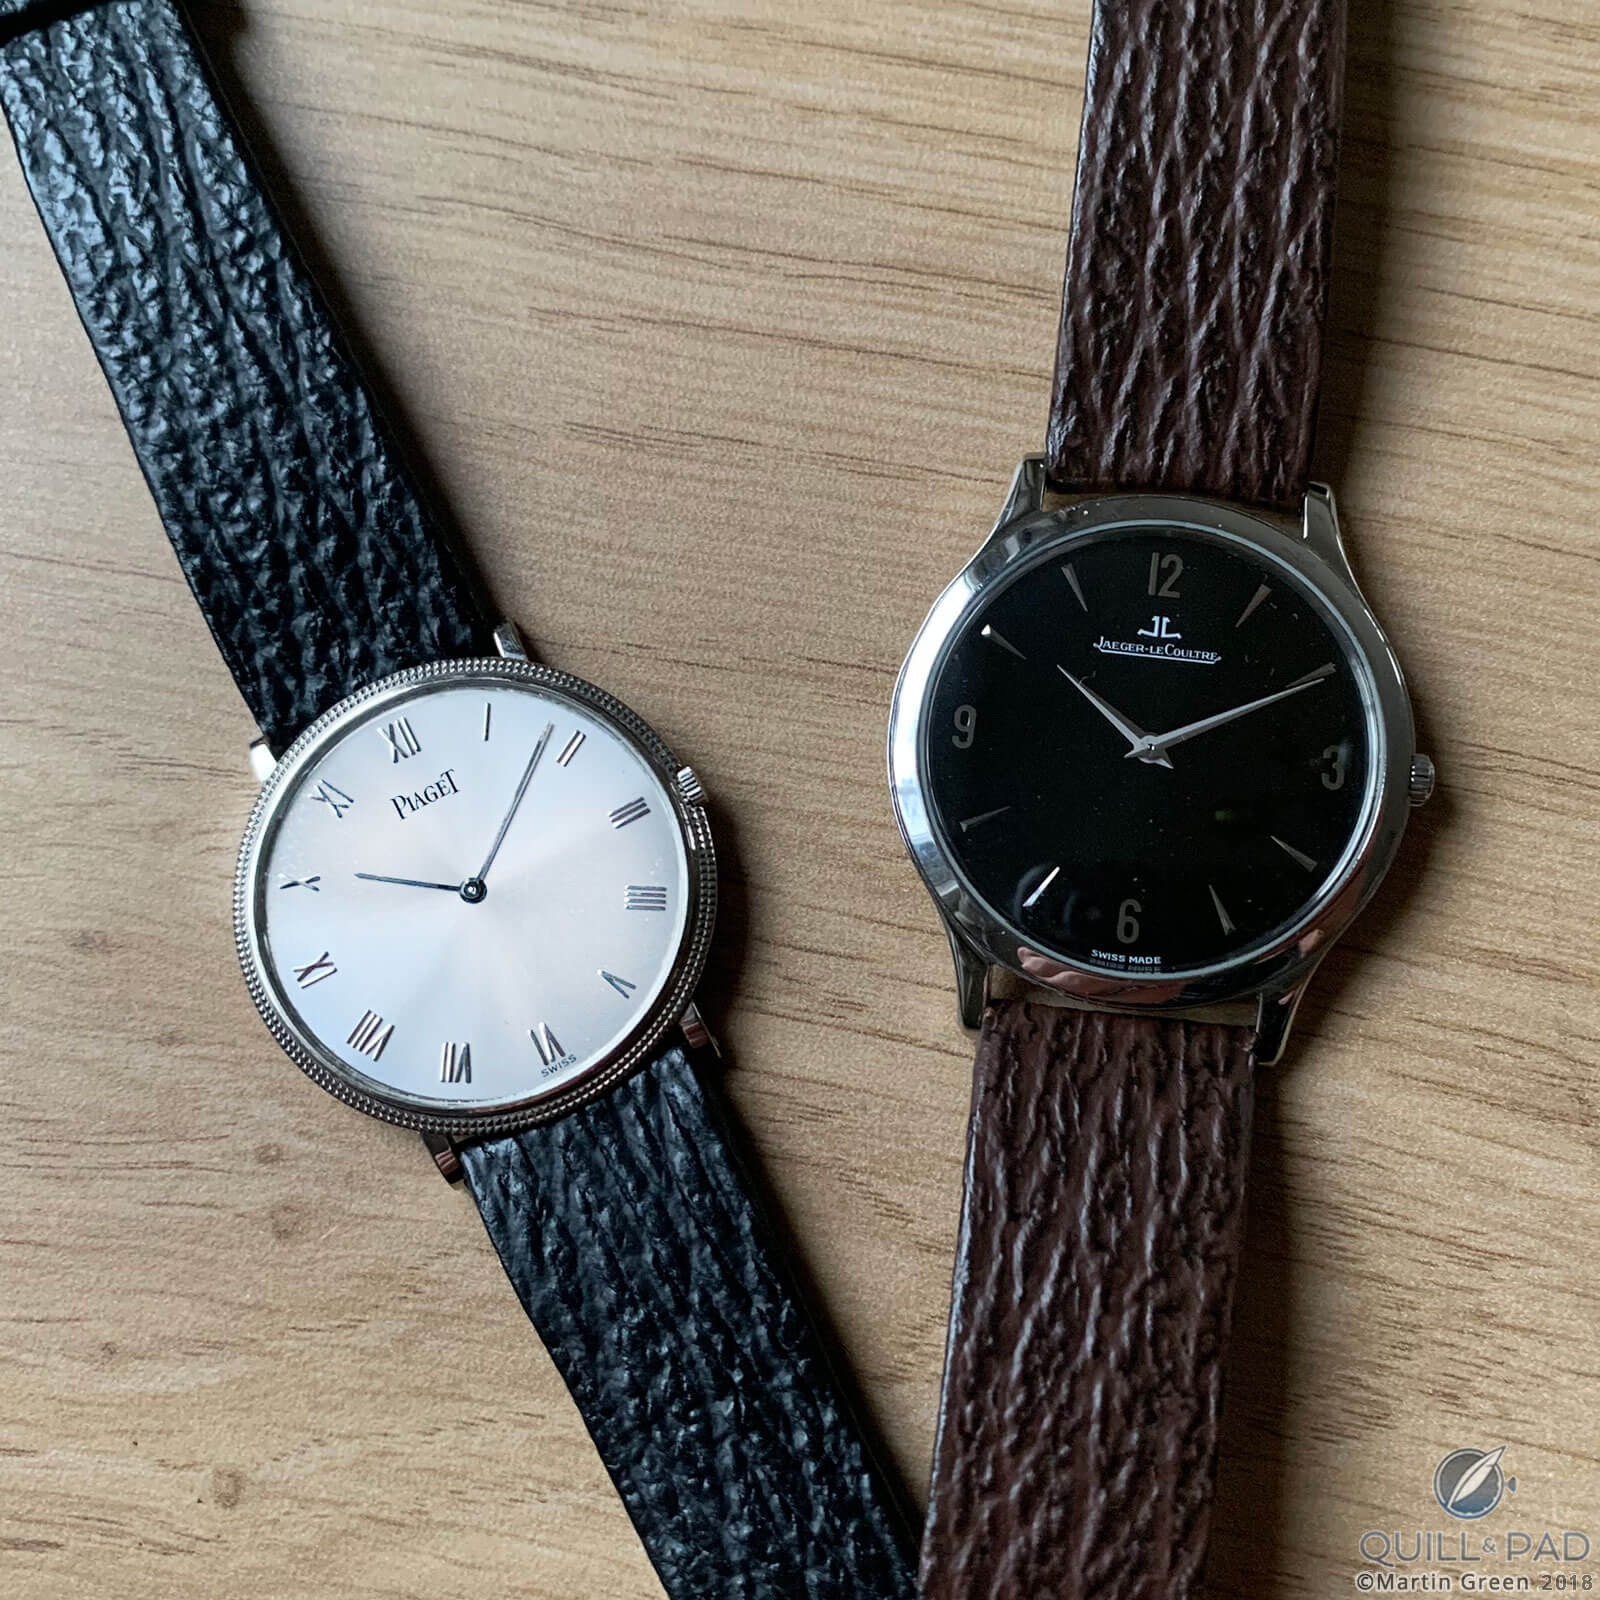 Piaget Altiplano (left) and Jaeger-LeCoultre Master Ultra Thin